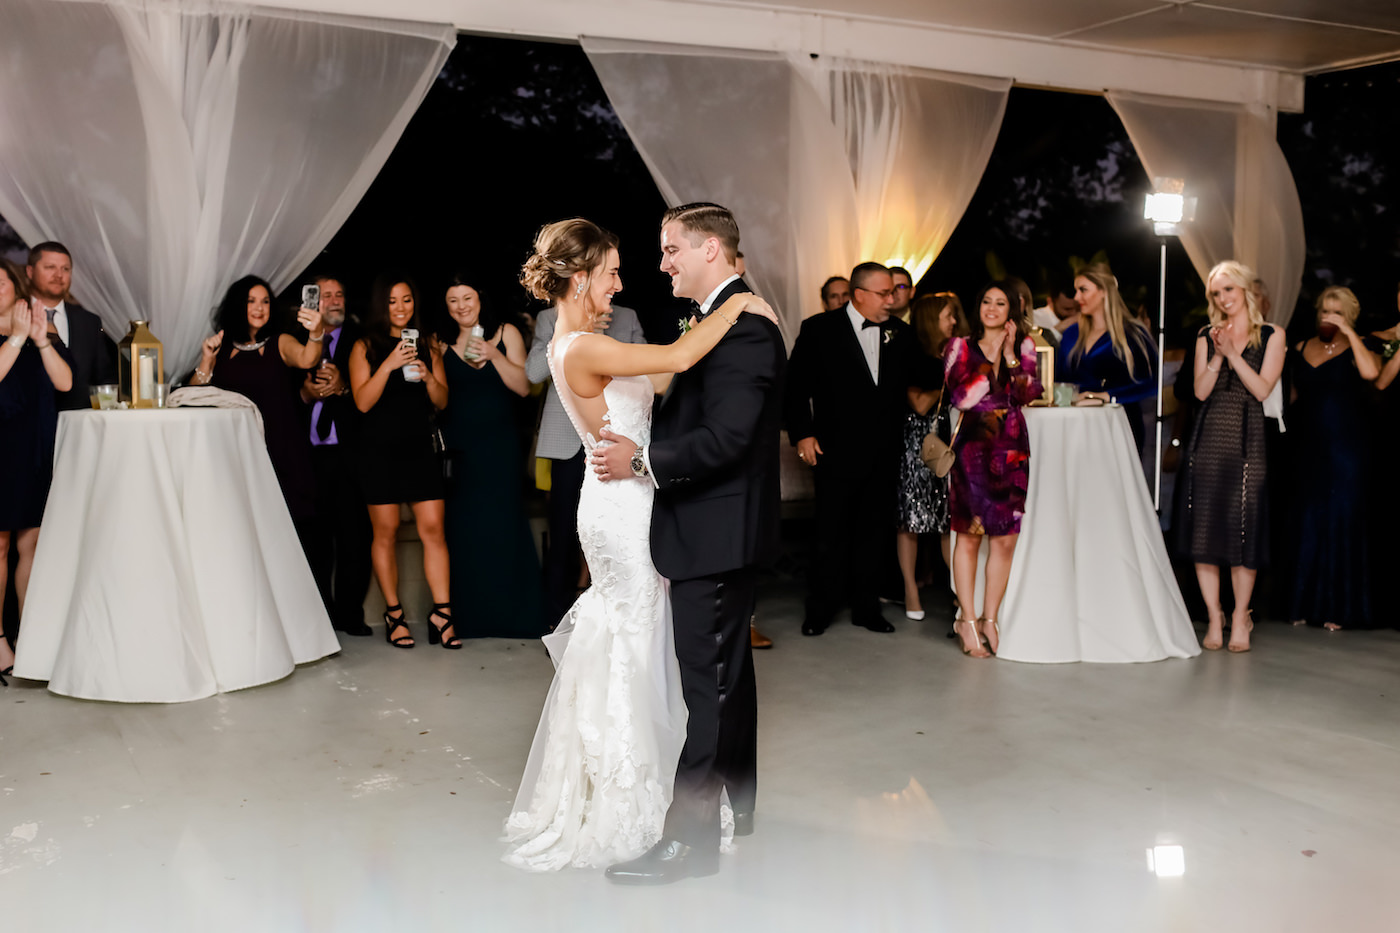 Classic Bride and Groom First Dance Wedding Reception Portrait, White Draping and White Dance Floor | Wedding Photographer Lifelong Photography Studio | Wedding Rentals and Lighting Gabro Event Services | Tampa Bay Wedding Planner Blue Skies Weddings and Events